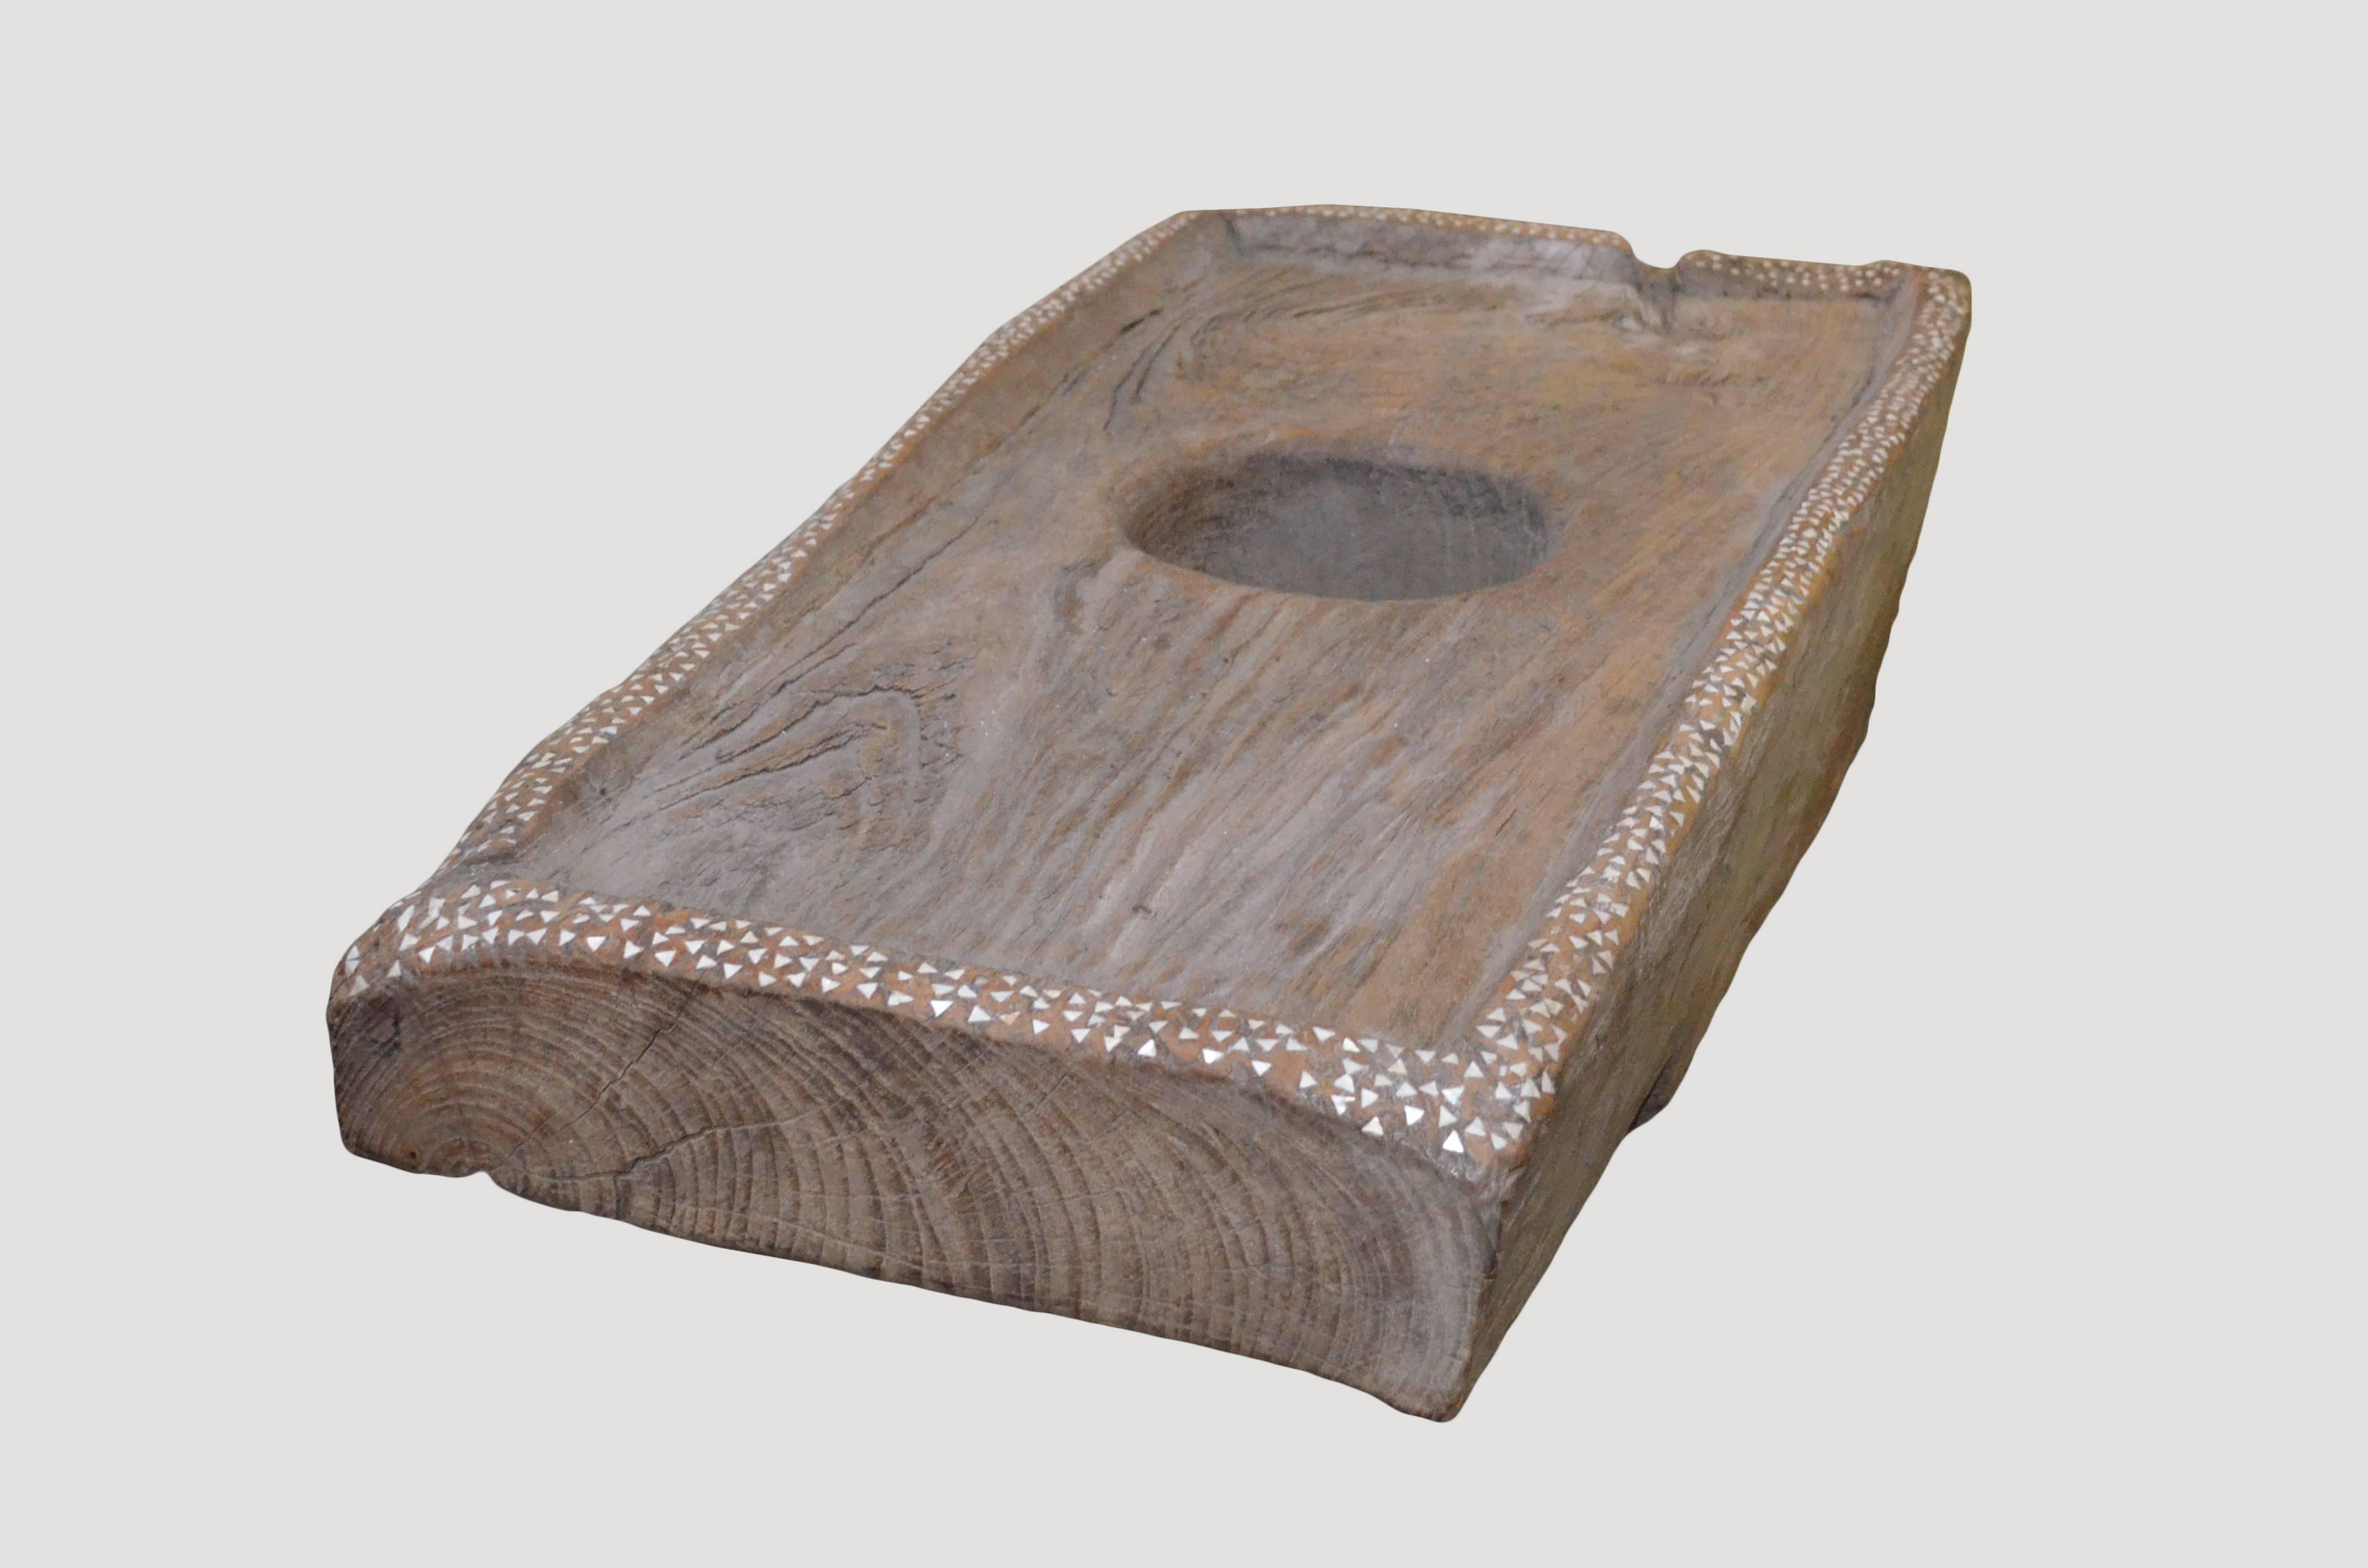 Originally used as a rice pounder. Carved from a single teak slab with added shall inlay. Great with a glass or Lucite top as coffee or side table.